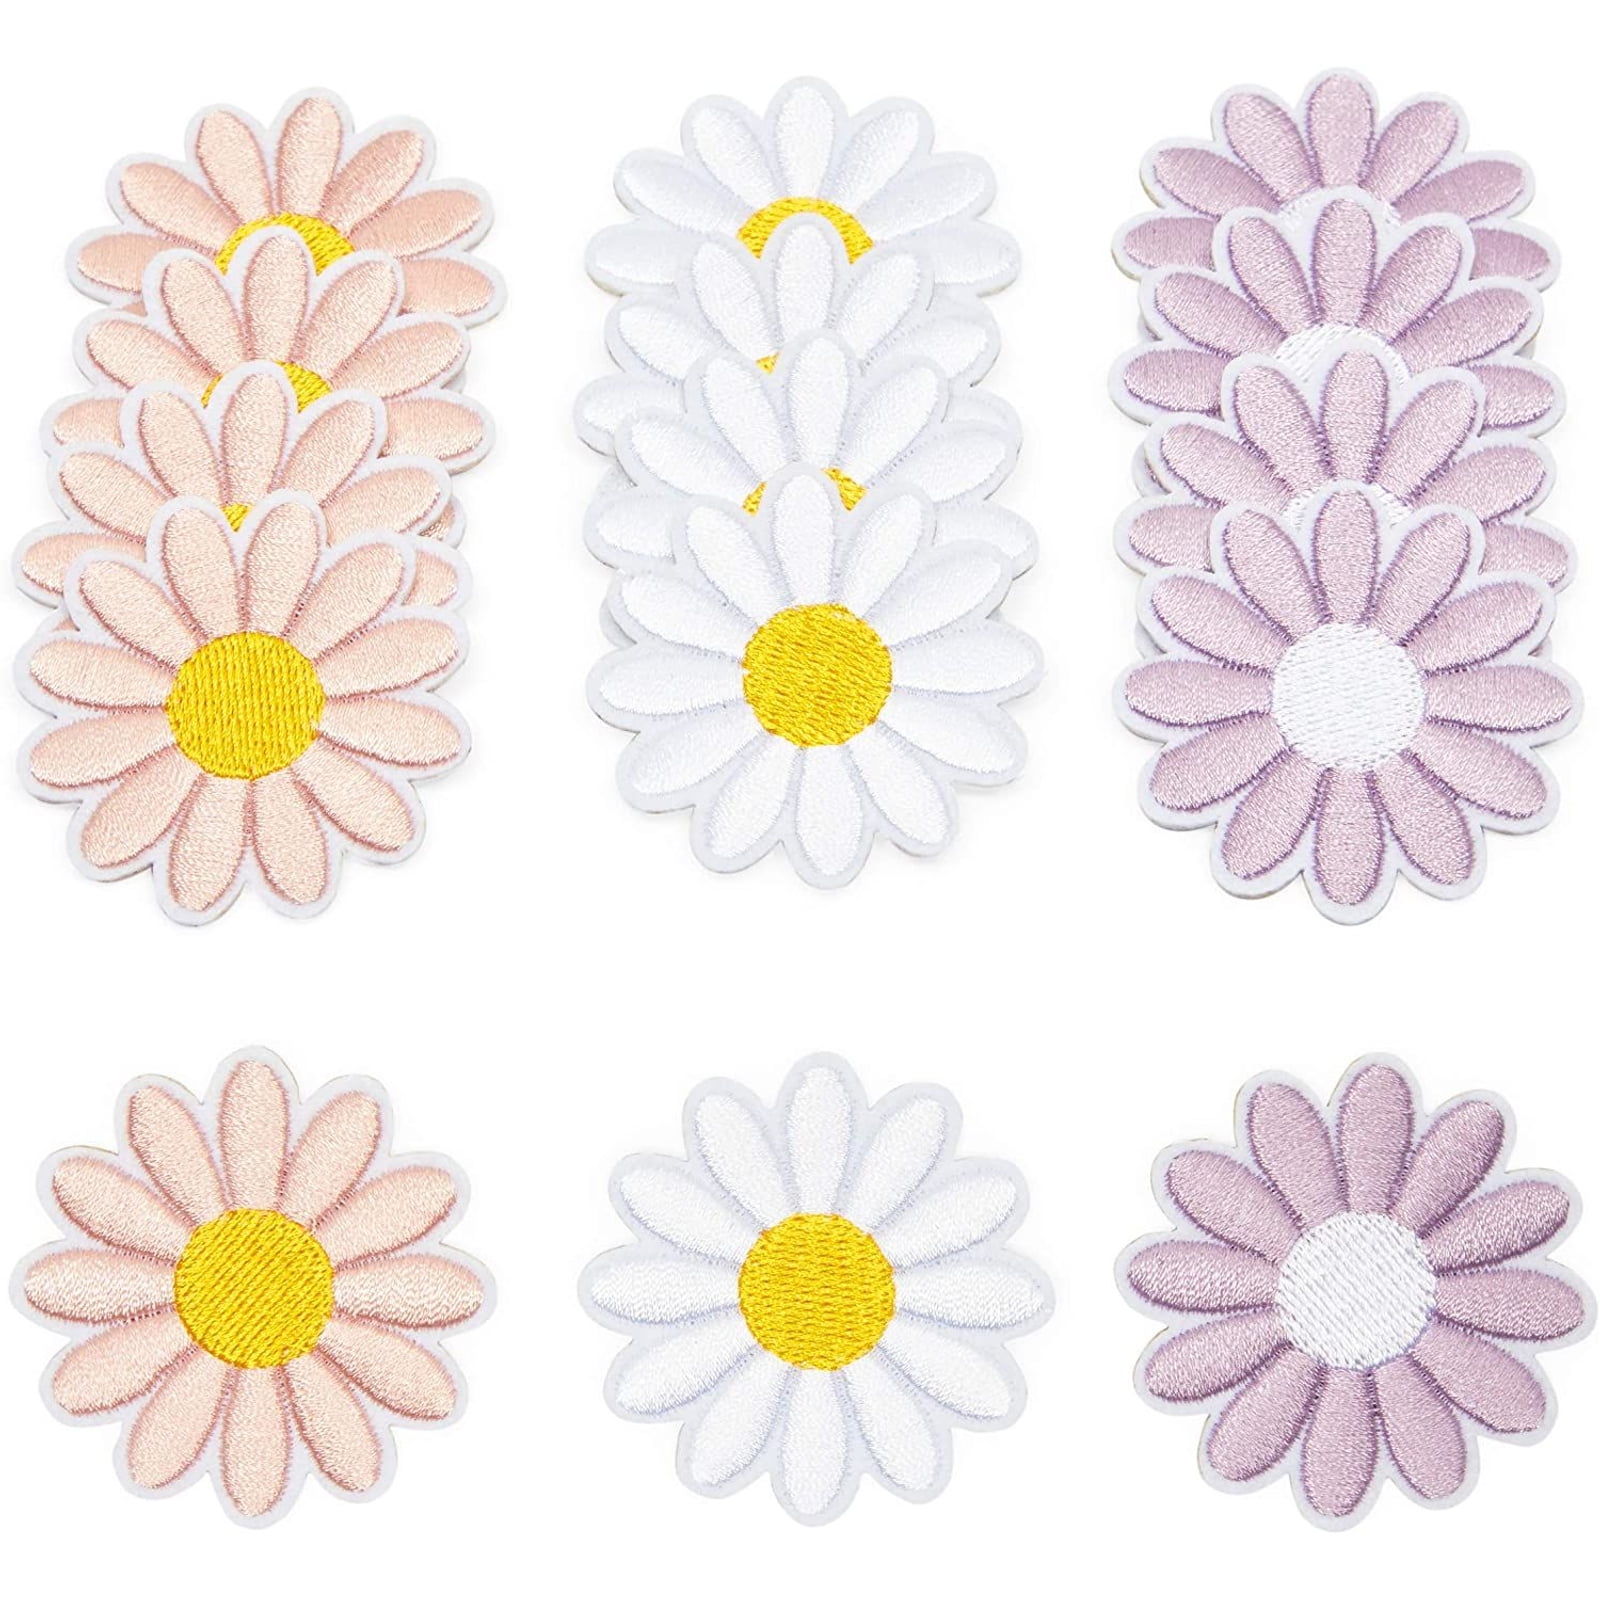 1.75 Yellow Flower Daisy Iron on Embroidery Patch